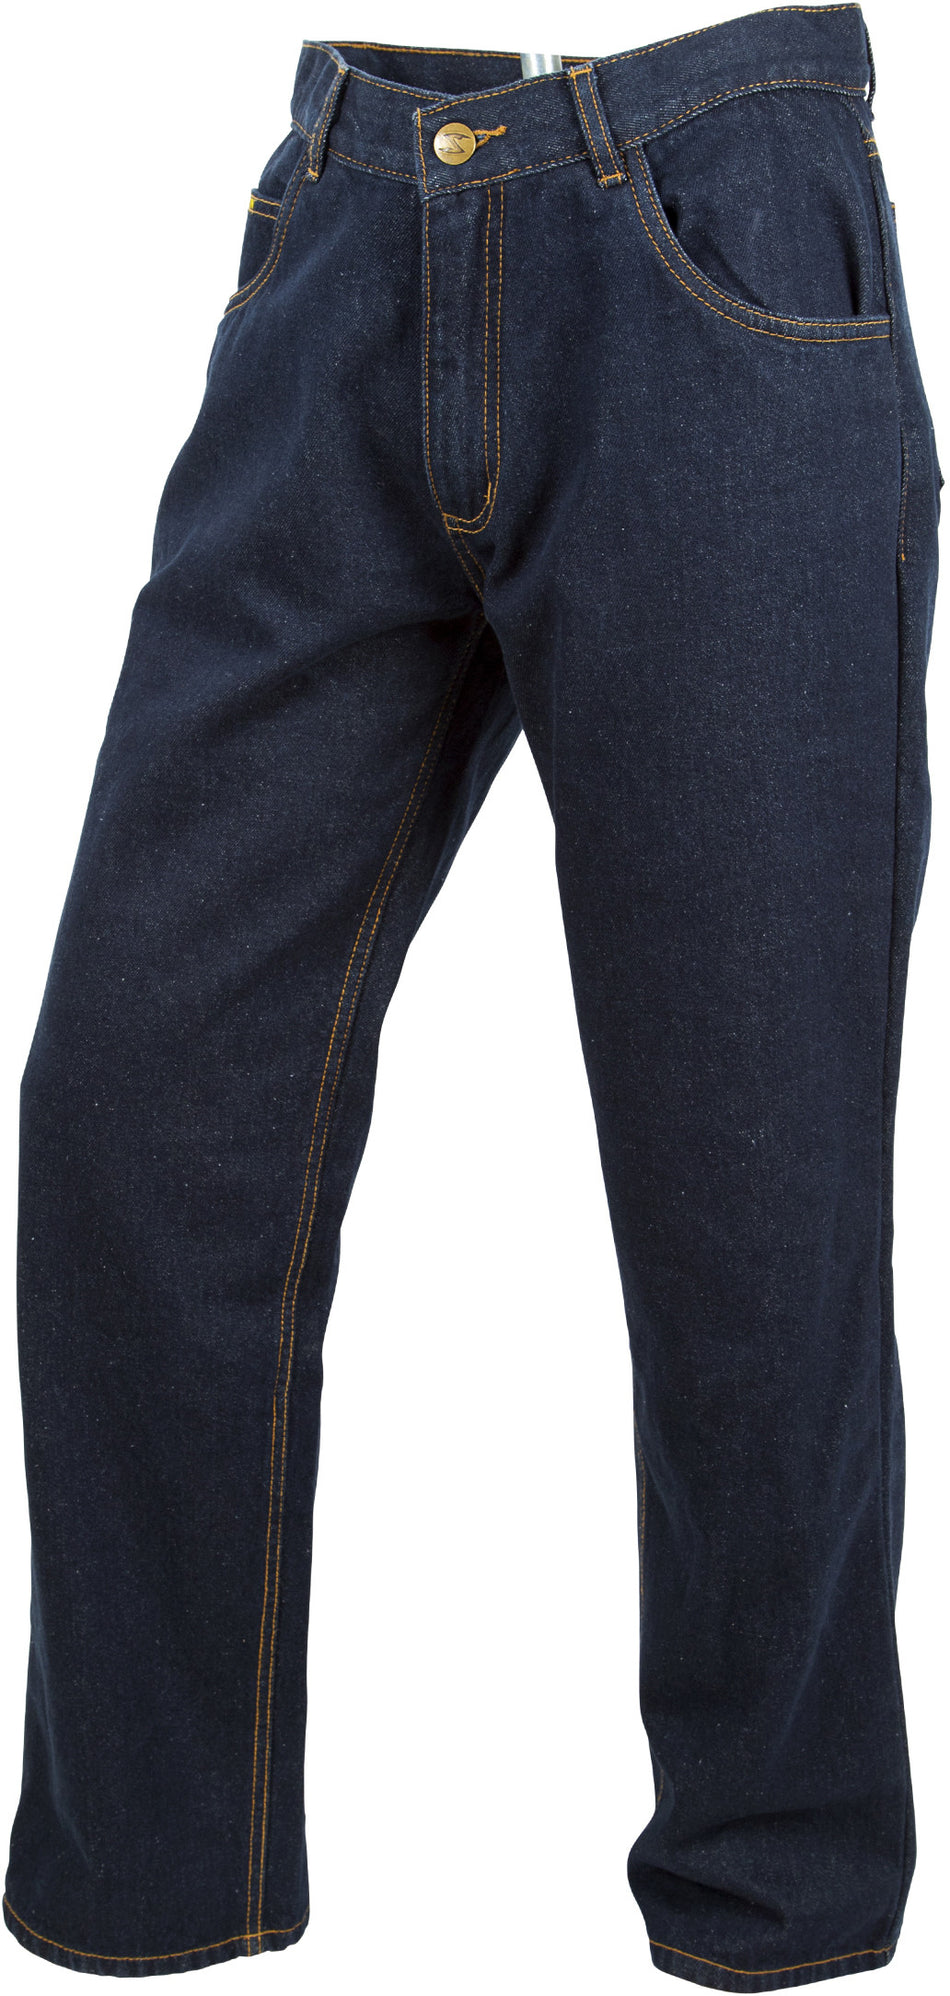 SCORPION EXO Covert Jeans Blue Size 30 2502-30